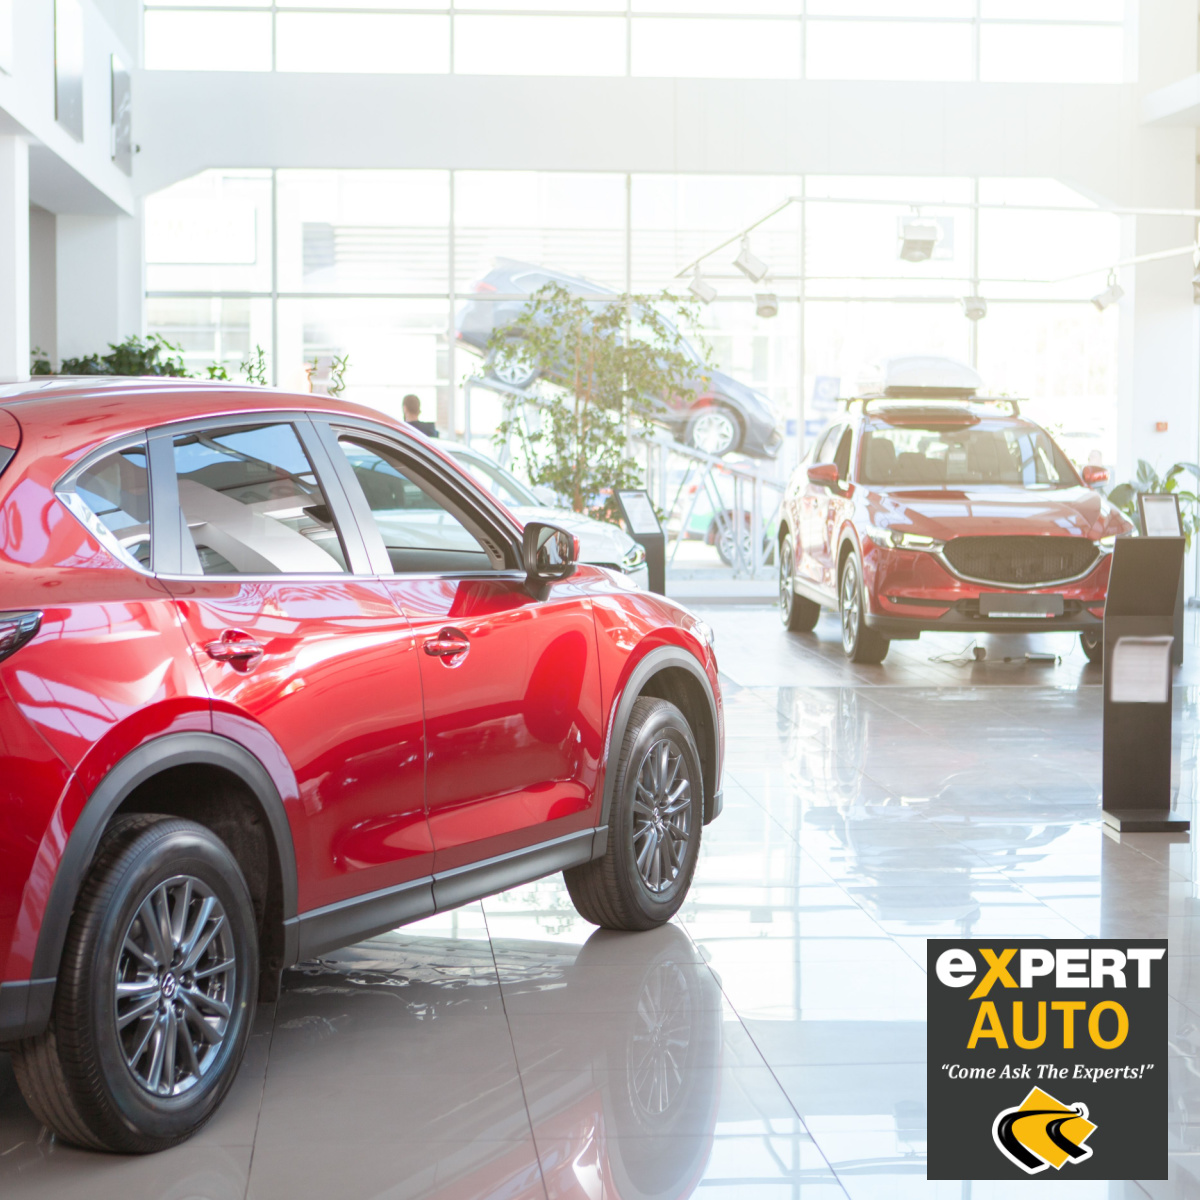 Our Temple Hills Dealership Has The Pre-Owned, Low Mileage Cars You Are Looking For